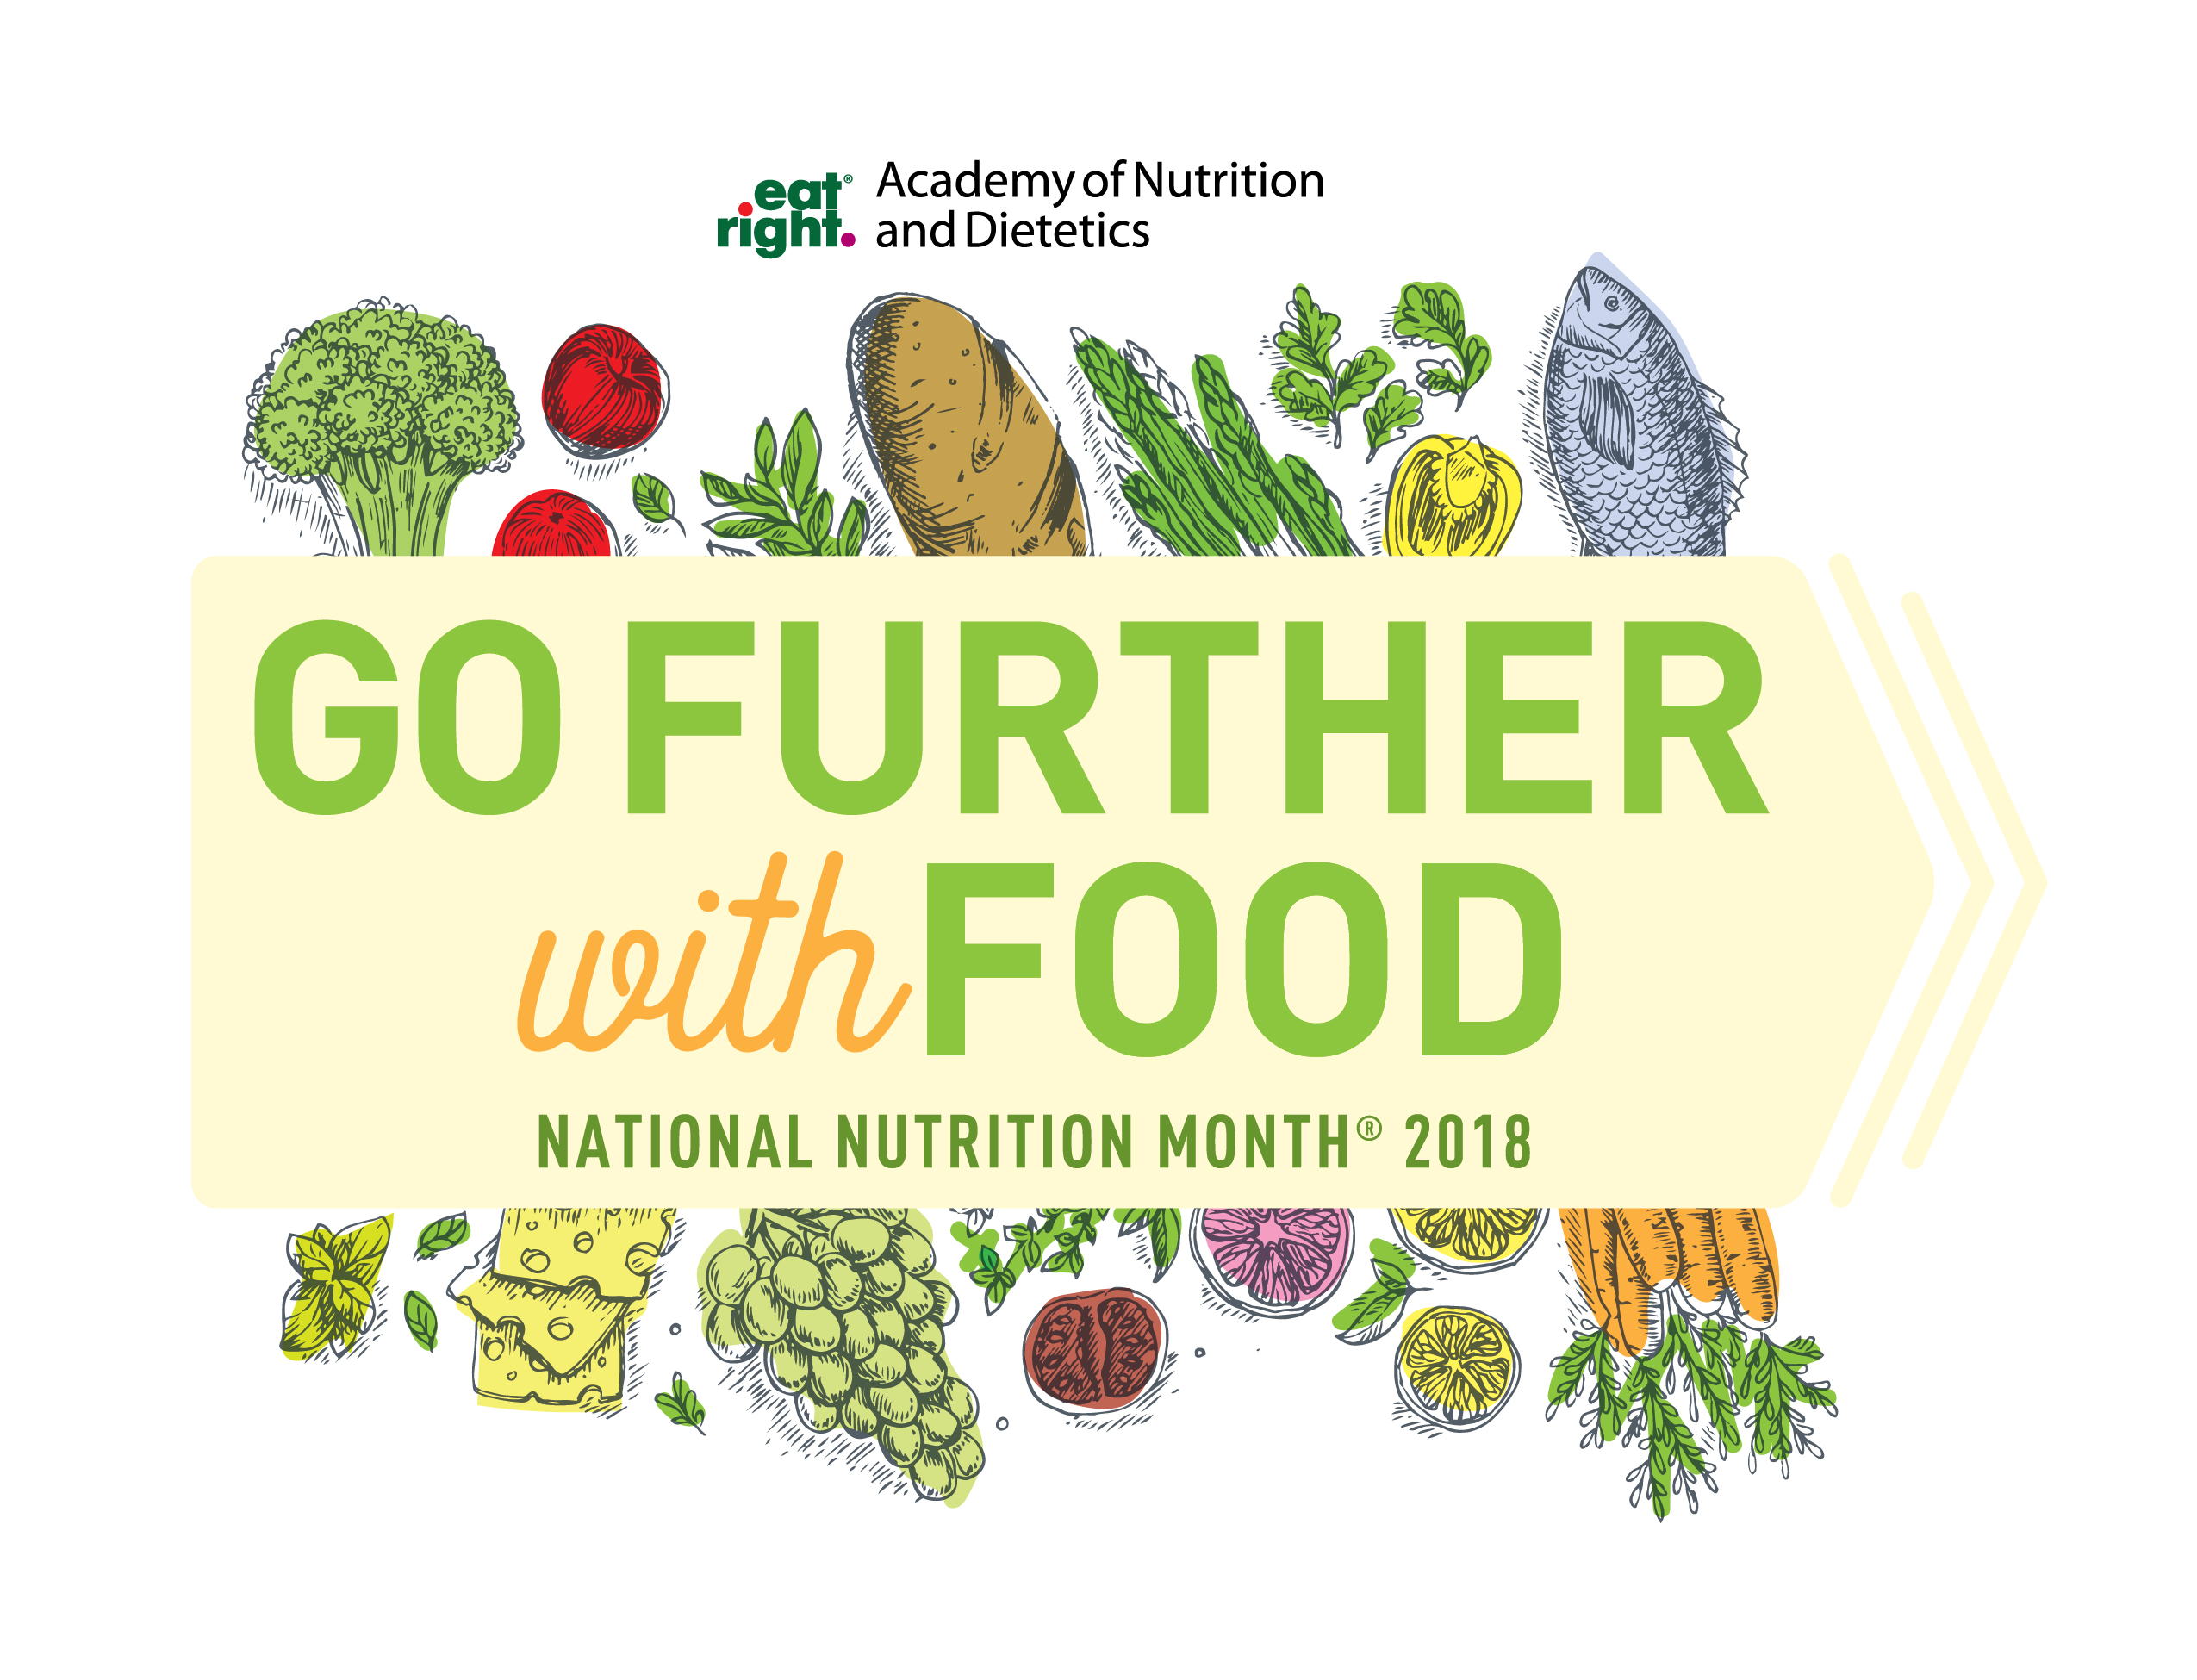 National Nutrition Month®: Go Further with Food! (And Reduce Waste)